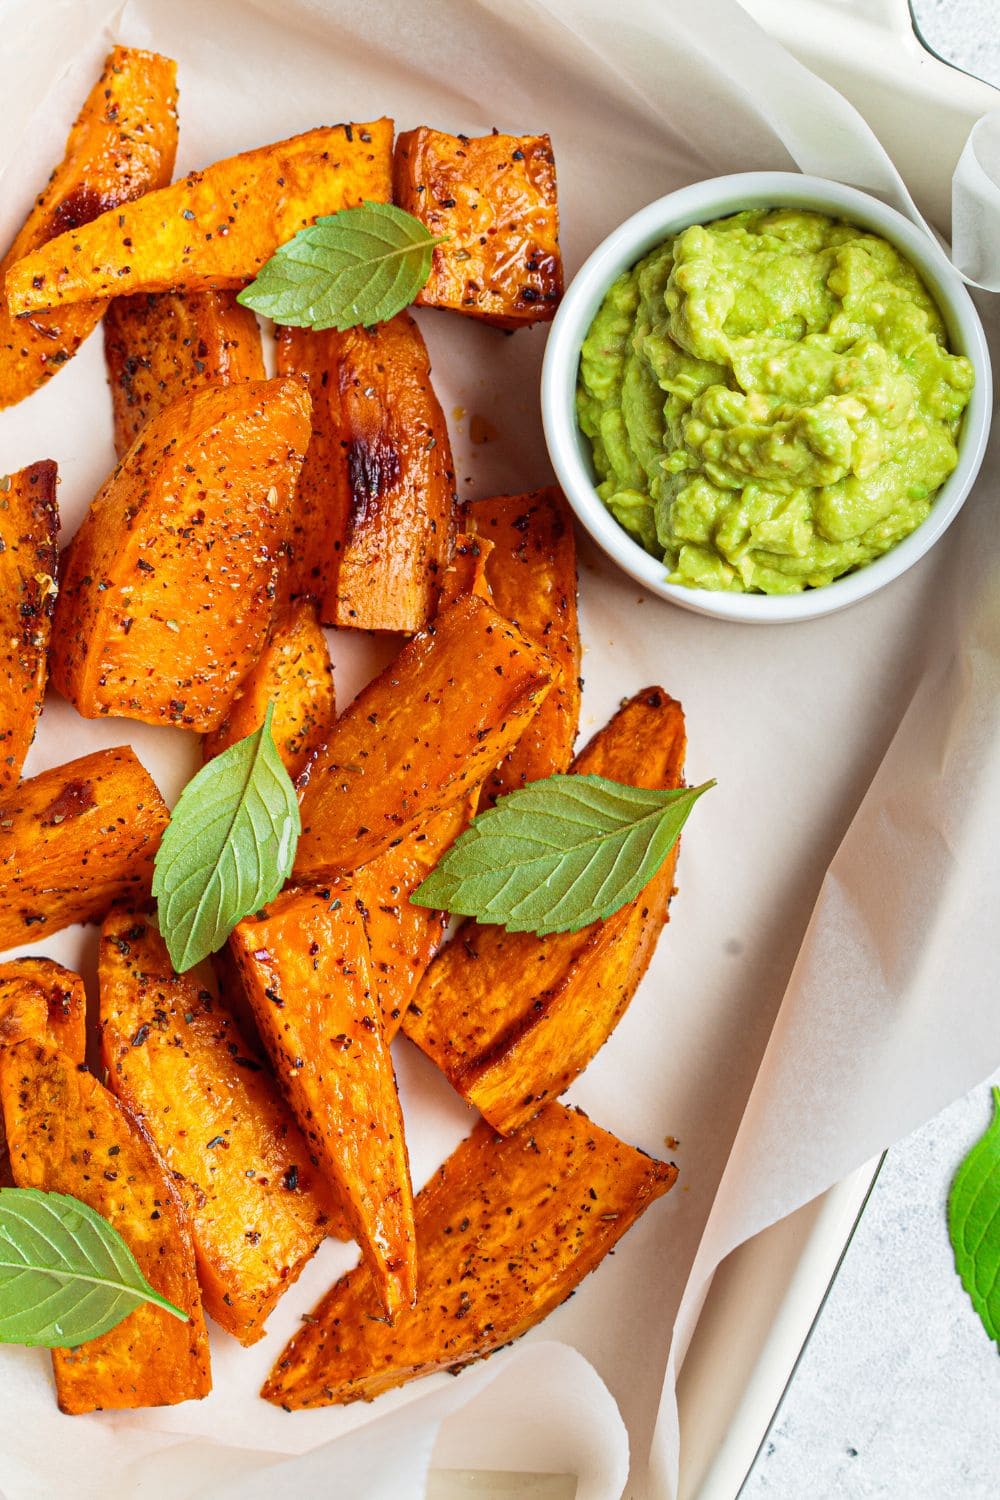 10 Best Dipping Sauces for Sweet Potato Fries. Shown in picture: Baked Sweet Potatoes with Avocado Dip